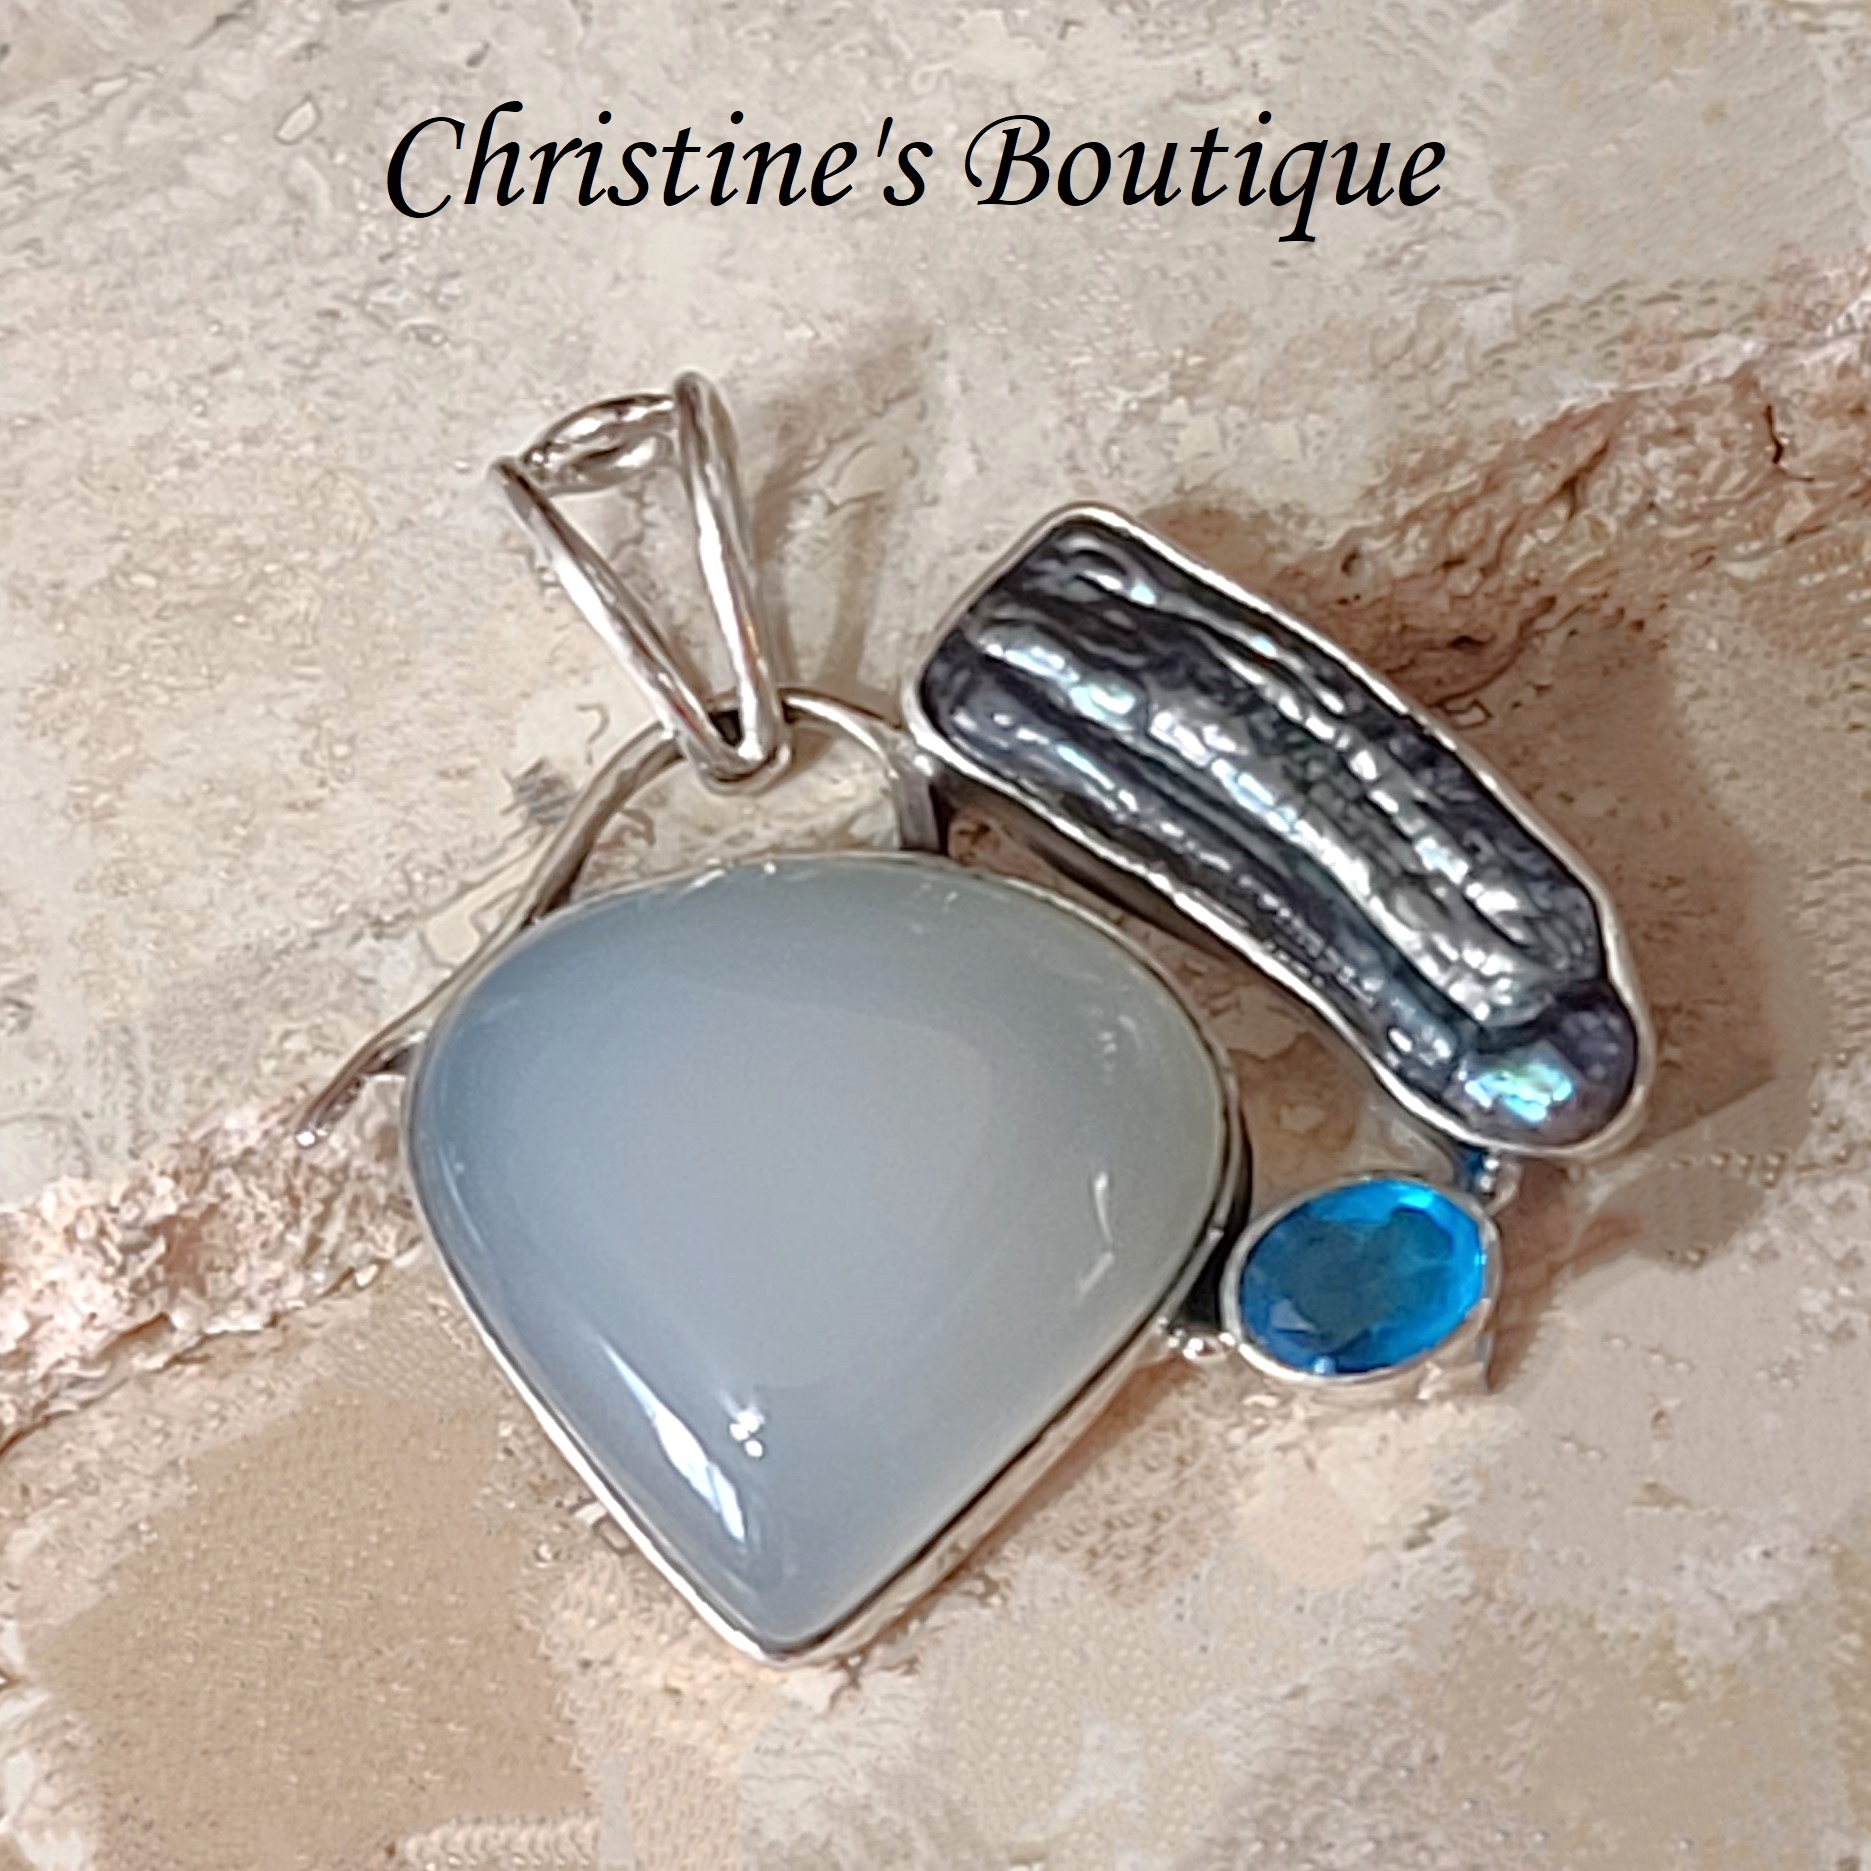 Chalcedony, Biwi pearl and Blue Quartz Sterling Silver Pendant - Click Image to Close